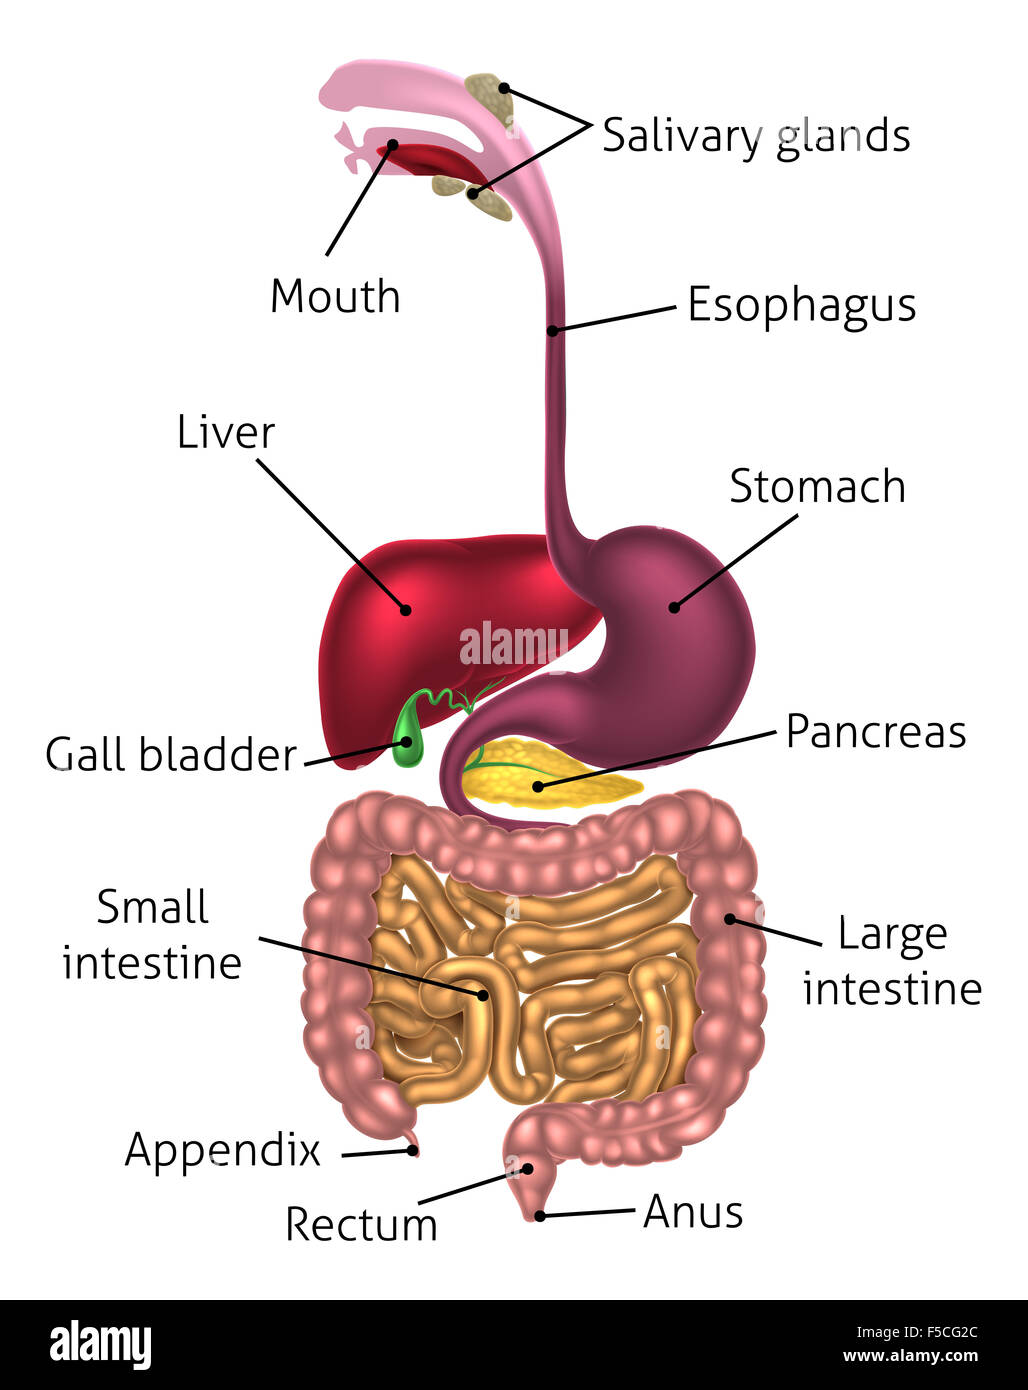 Human digestive system, digestive tract or alimentary canal including